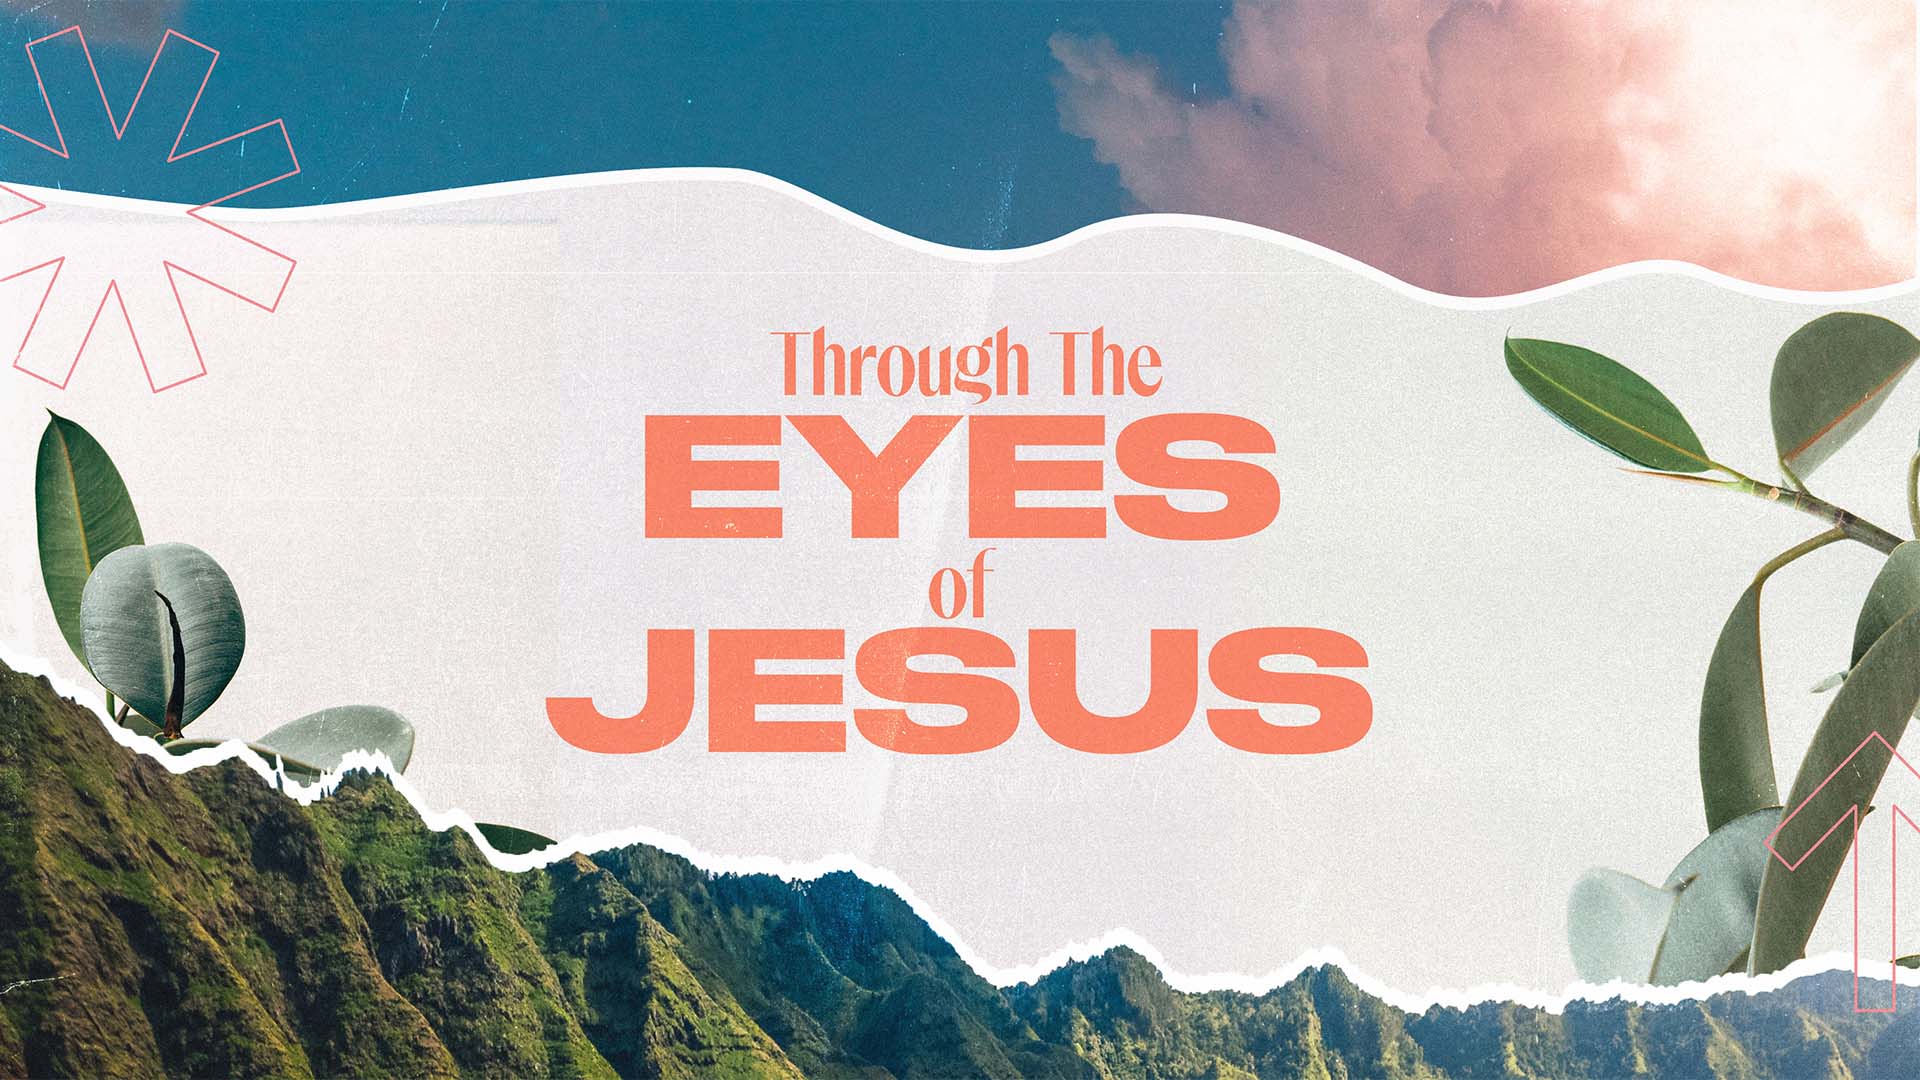 Message “jesus Sees Through Eyes Of Compassion” From Aaron Taylor